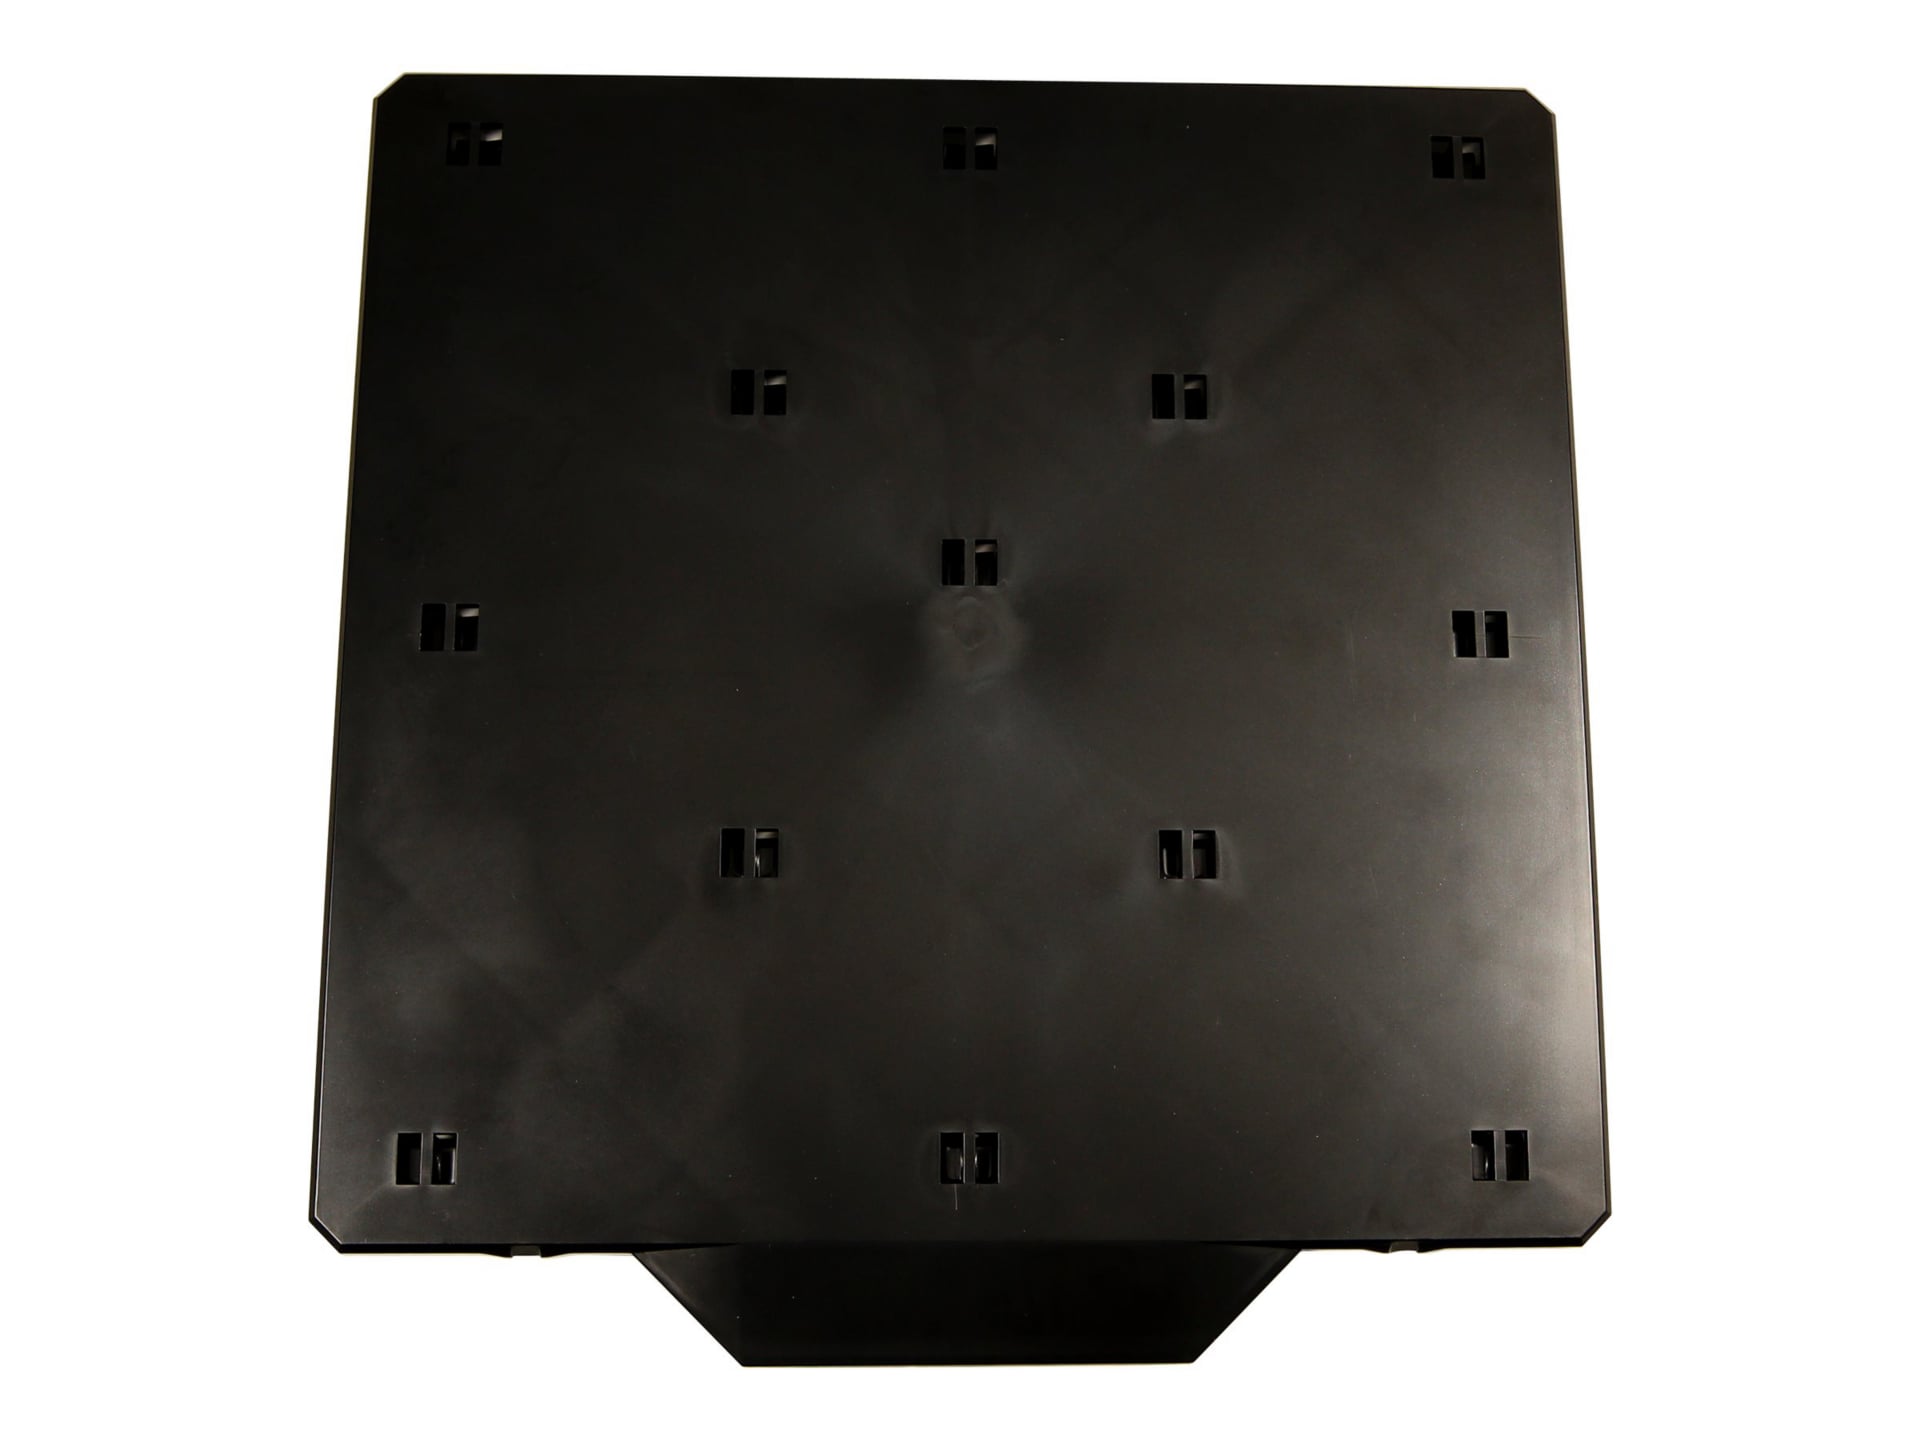 MakerBot build plate